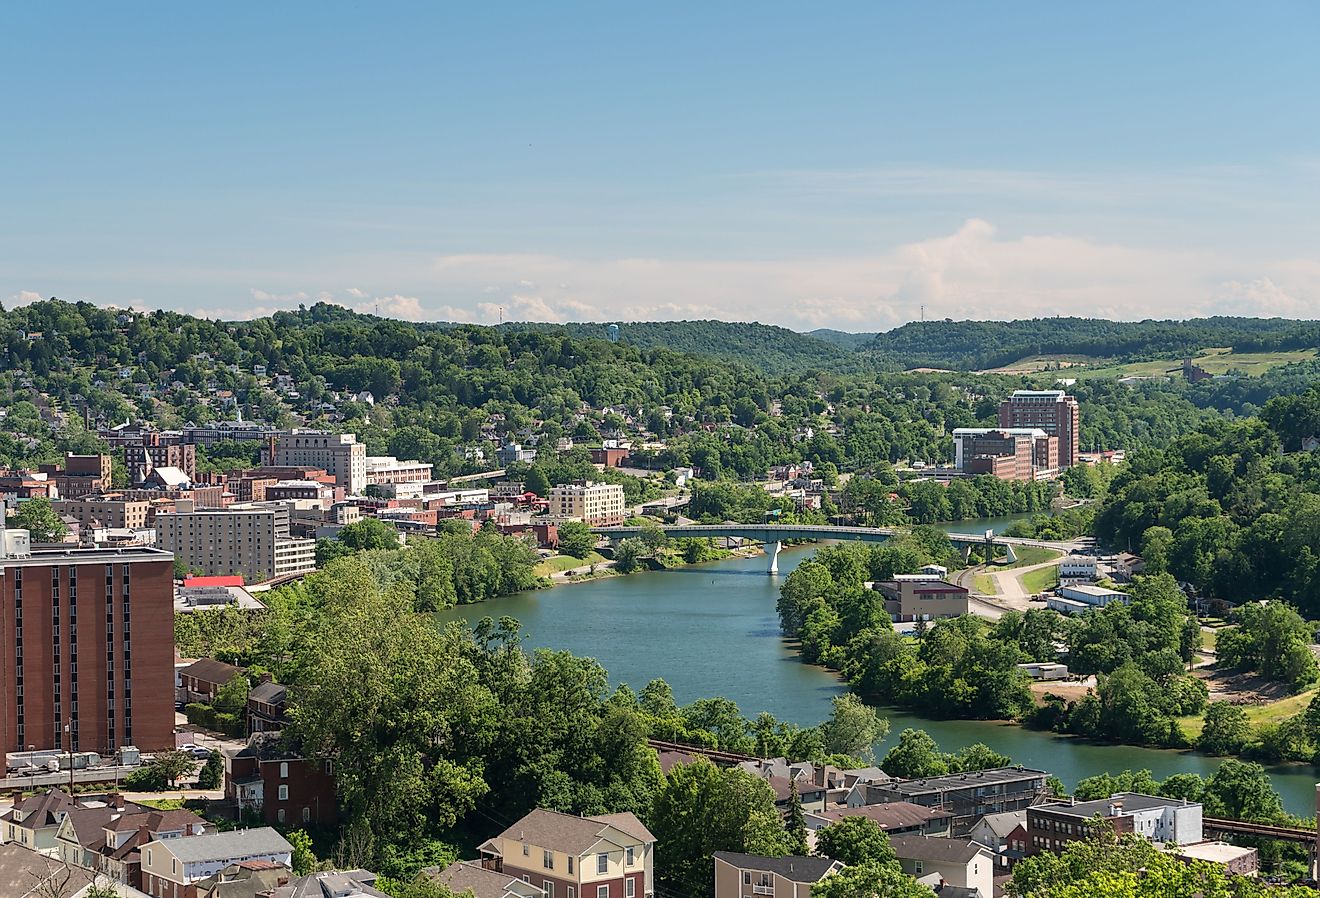 View of the downtown area of Morgantown West Virginia and campus of West Virginia University.